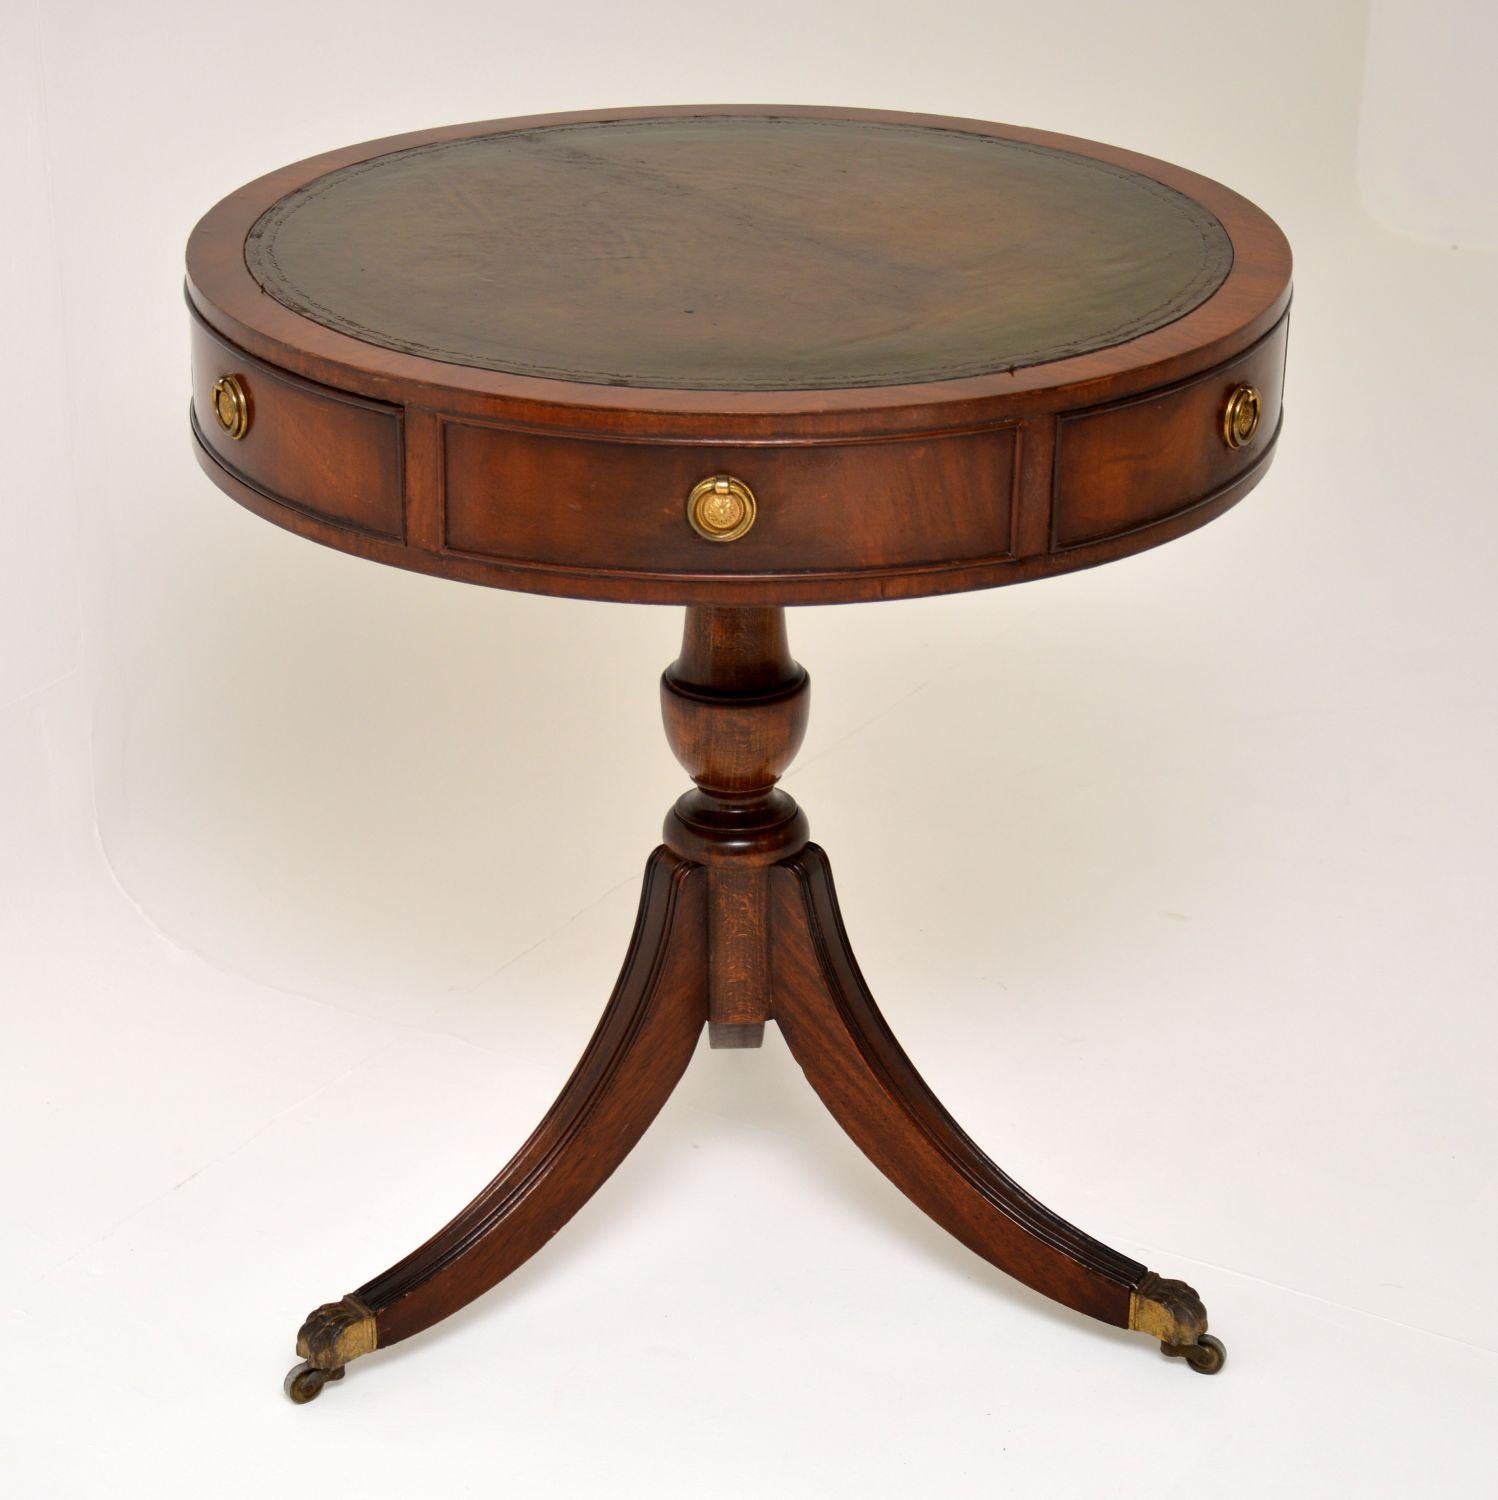 Nice quality antique Regency style mahogany drum table with a tooled leather top and in excellent condition, dating to circa 1930s period.

There are three working drawers and three dummy drawers with original brass handle. It has a strong looking